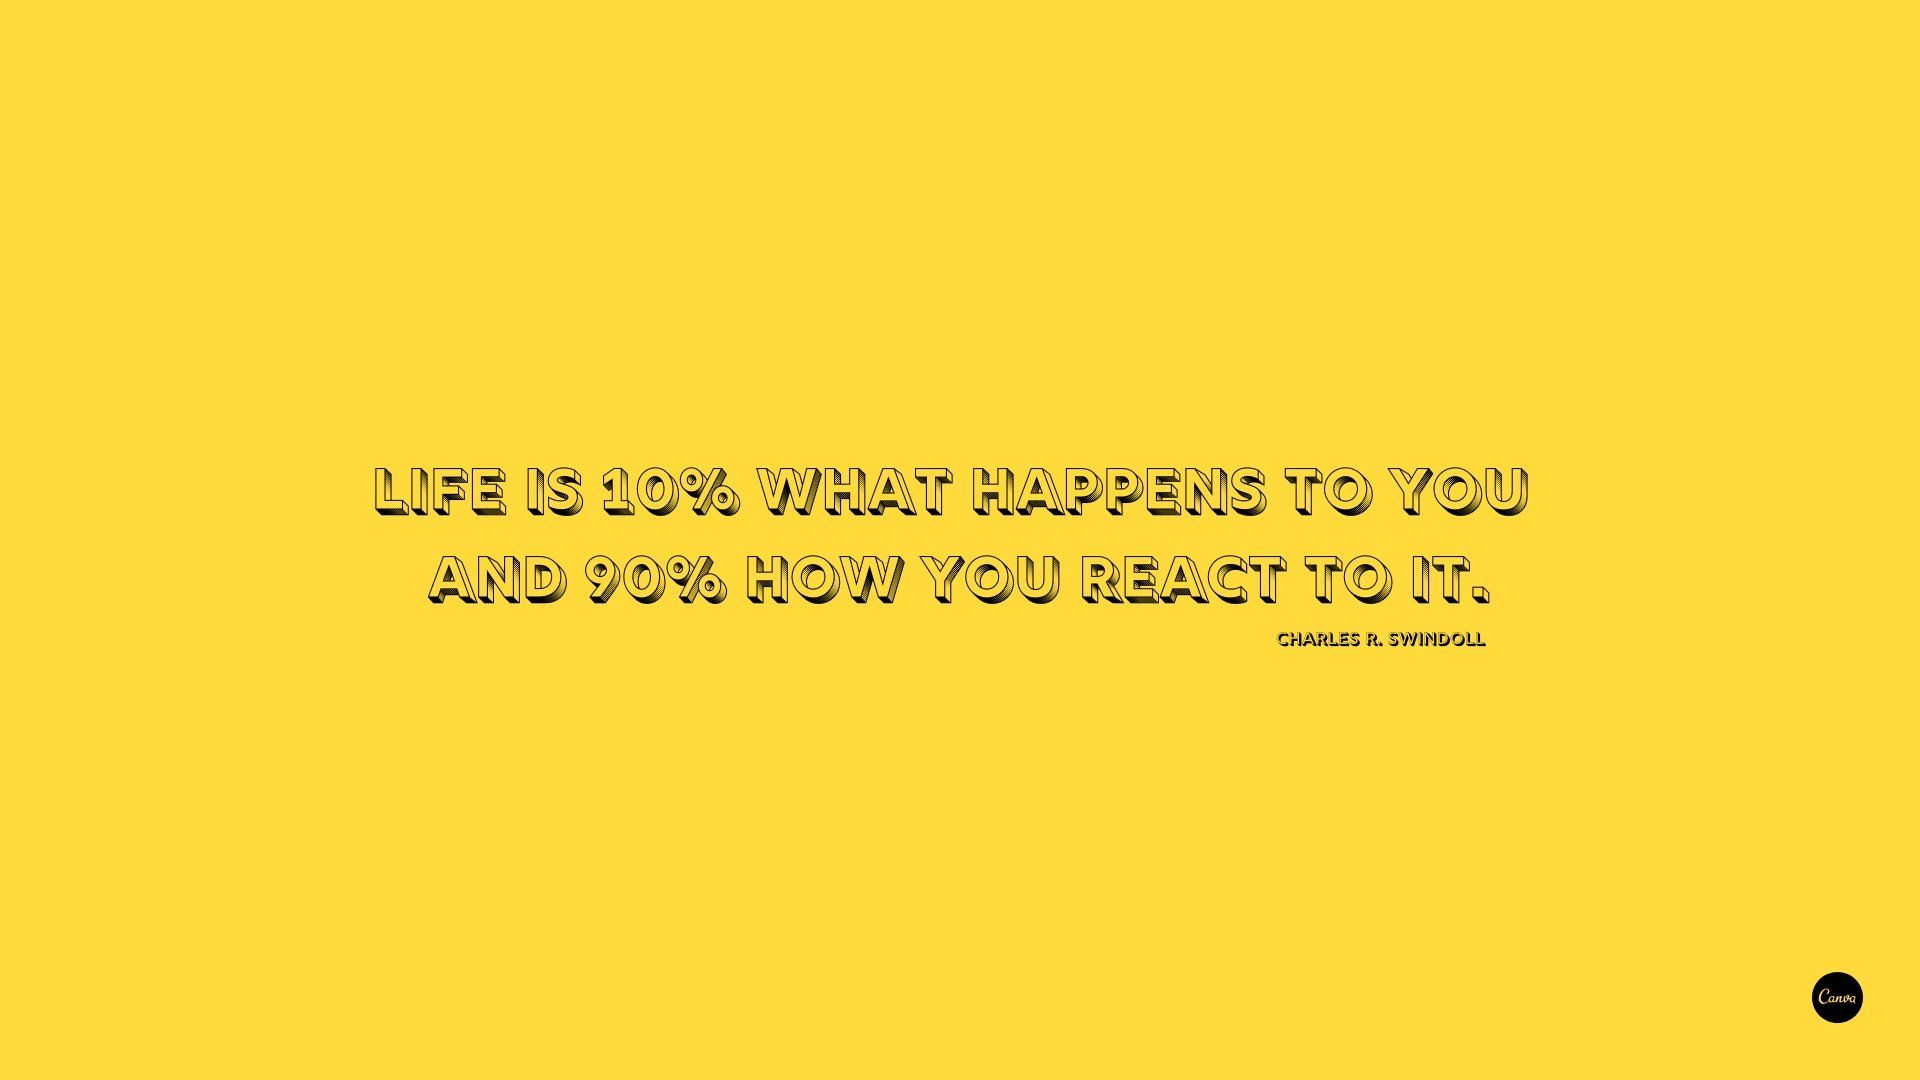 A yellow wallpaper with a quote from Charles R Swindoll which says 